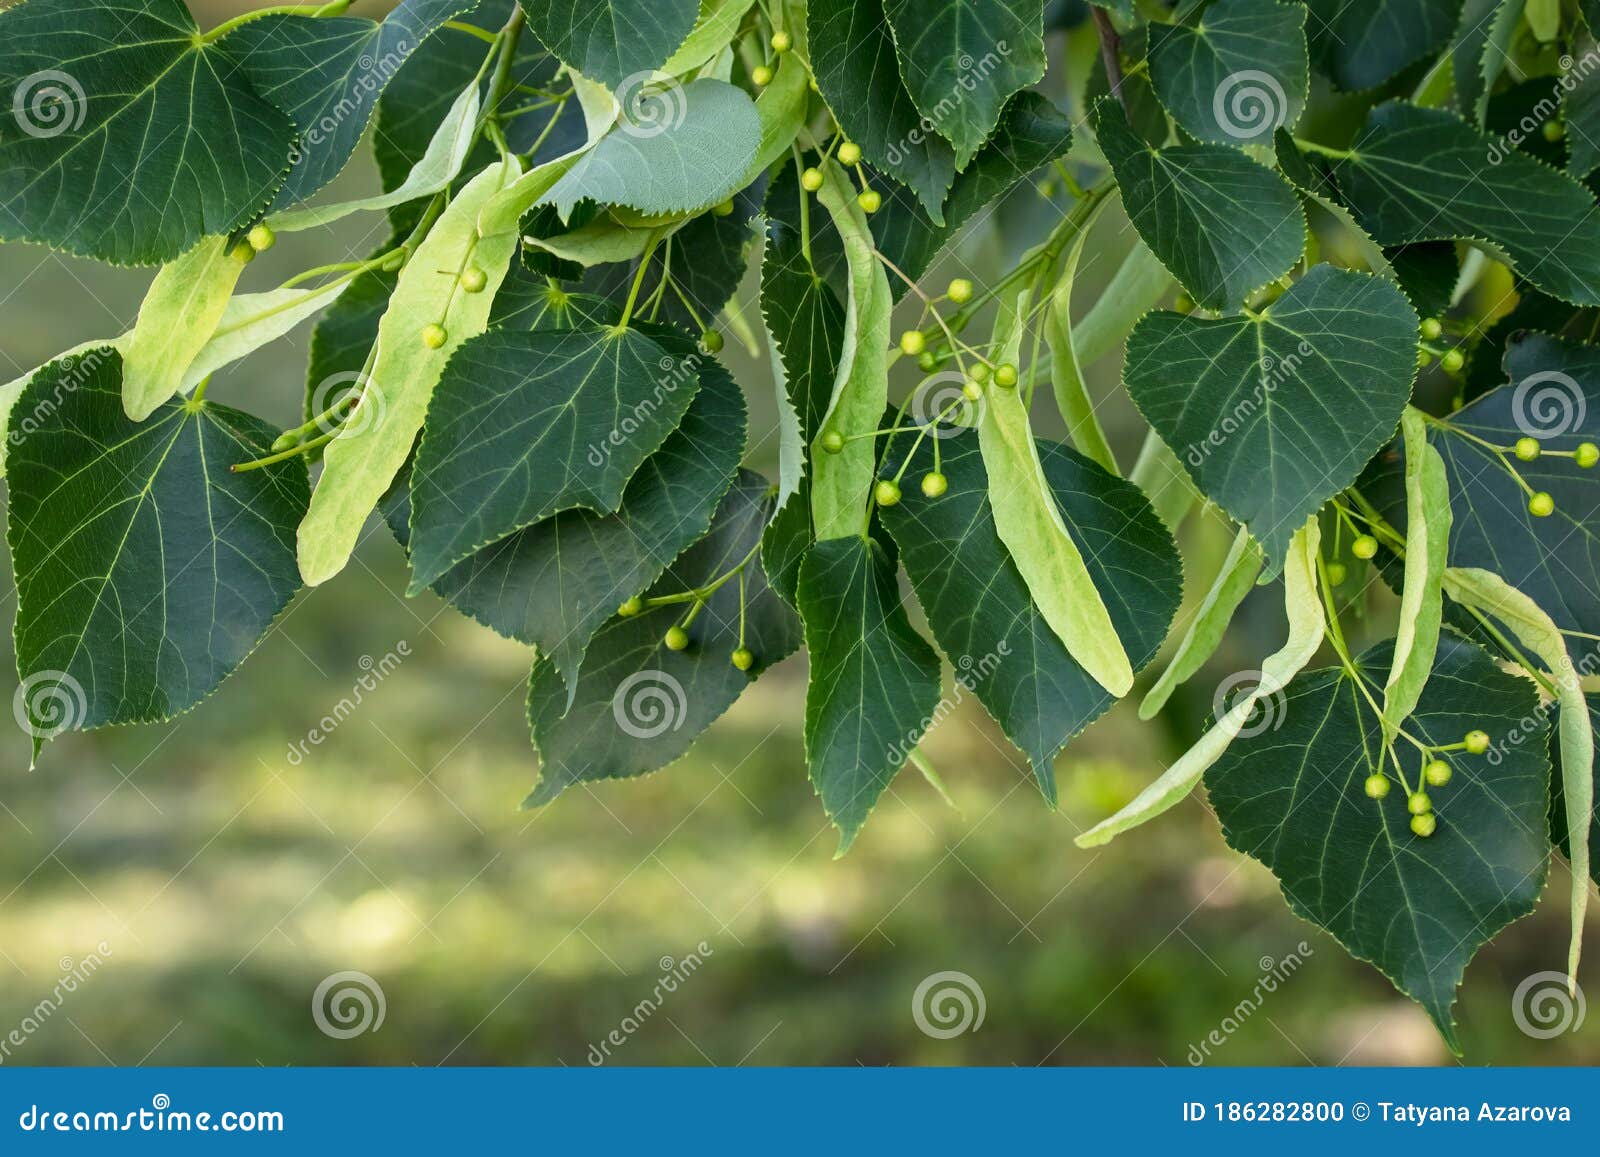 a branch of lime tree. green leaves of a linden tree. tilia americana. texture, nature background. botany pattern